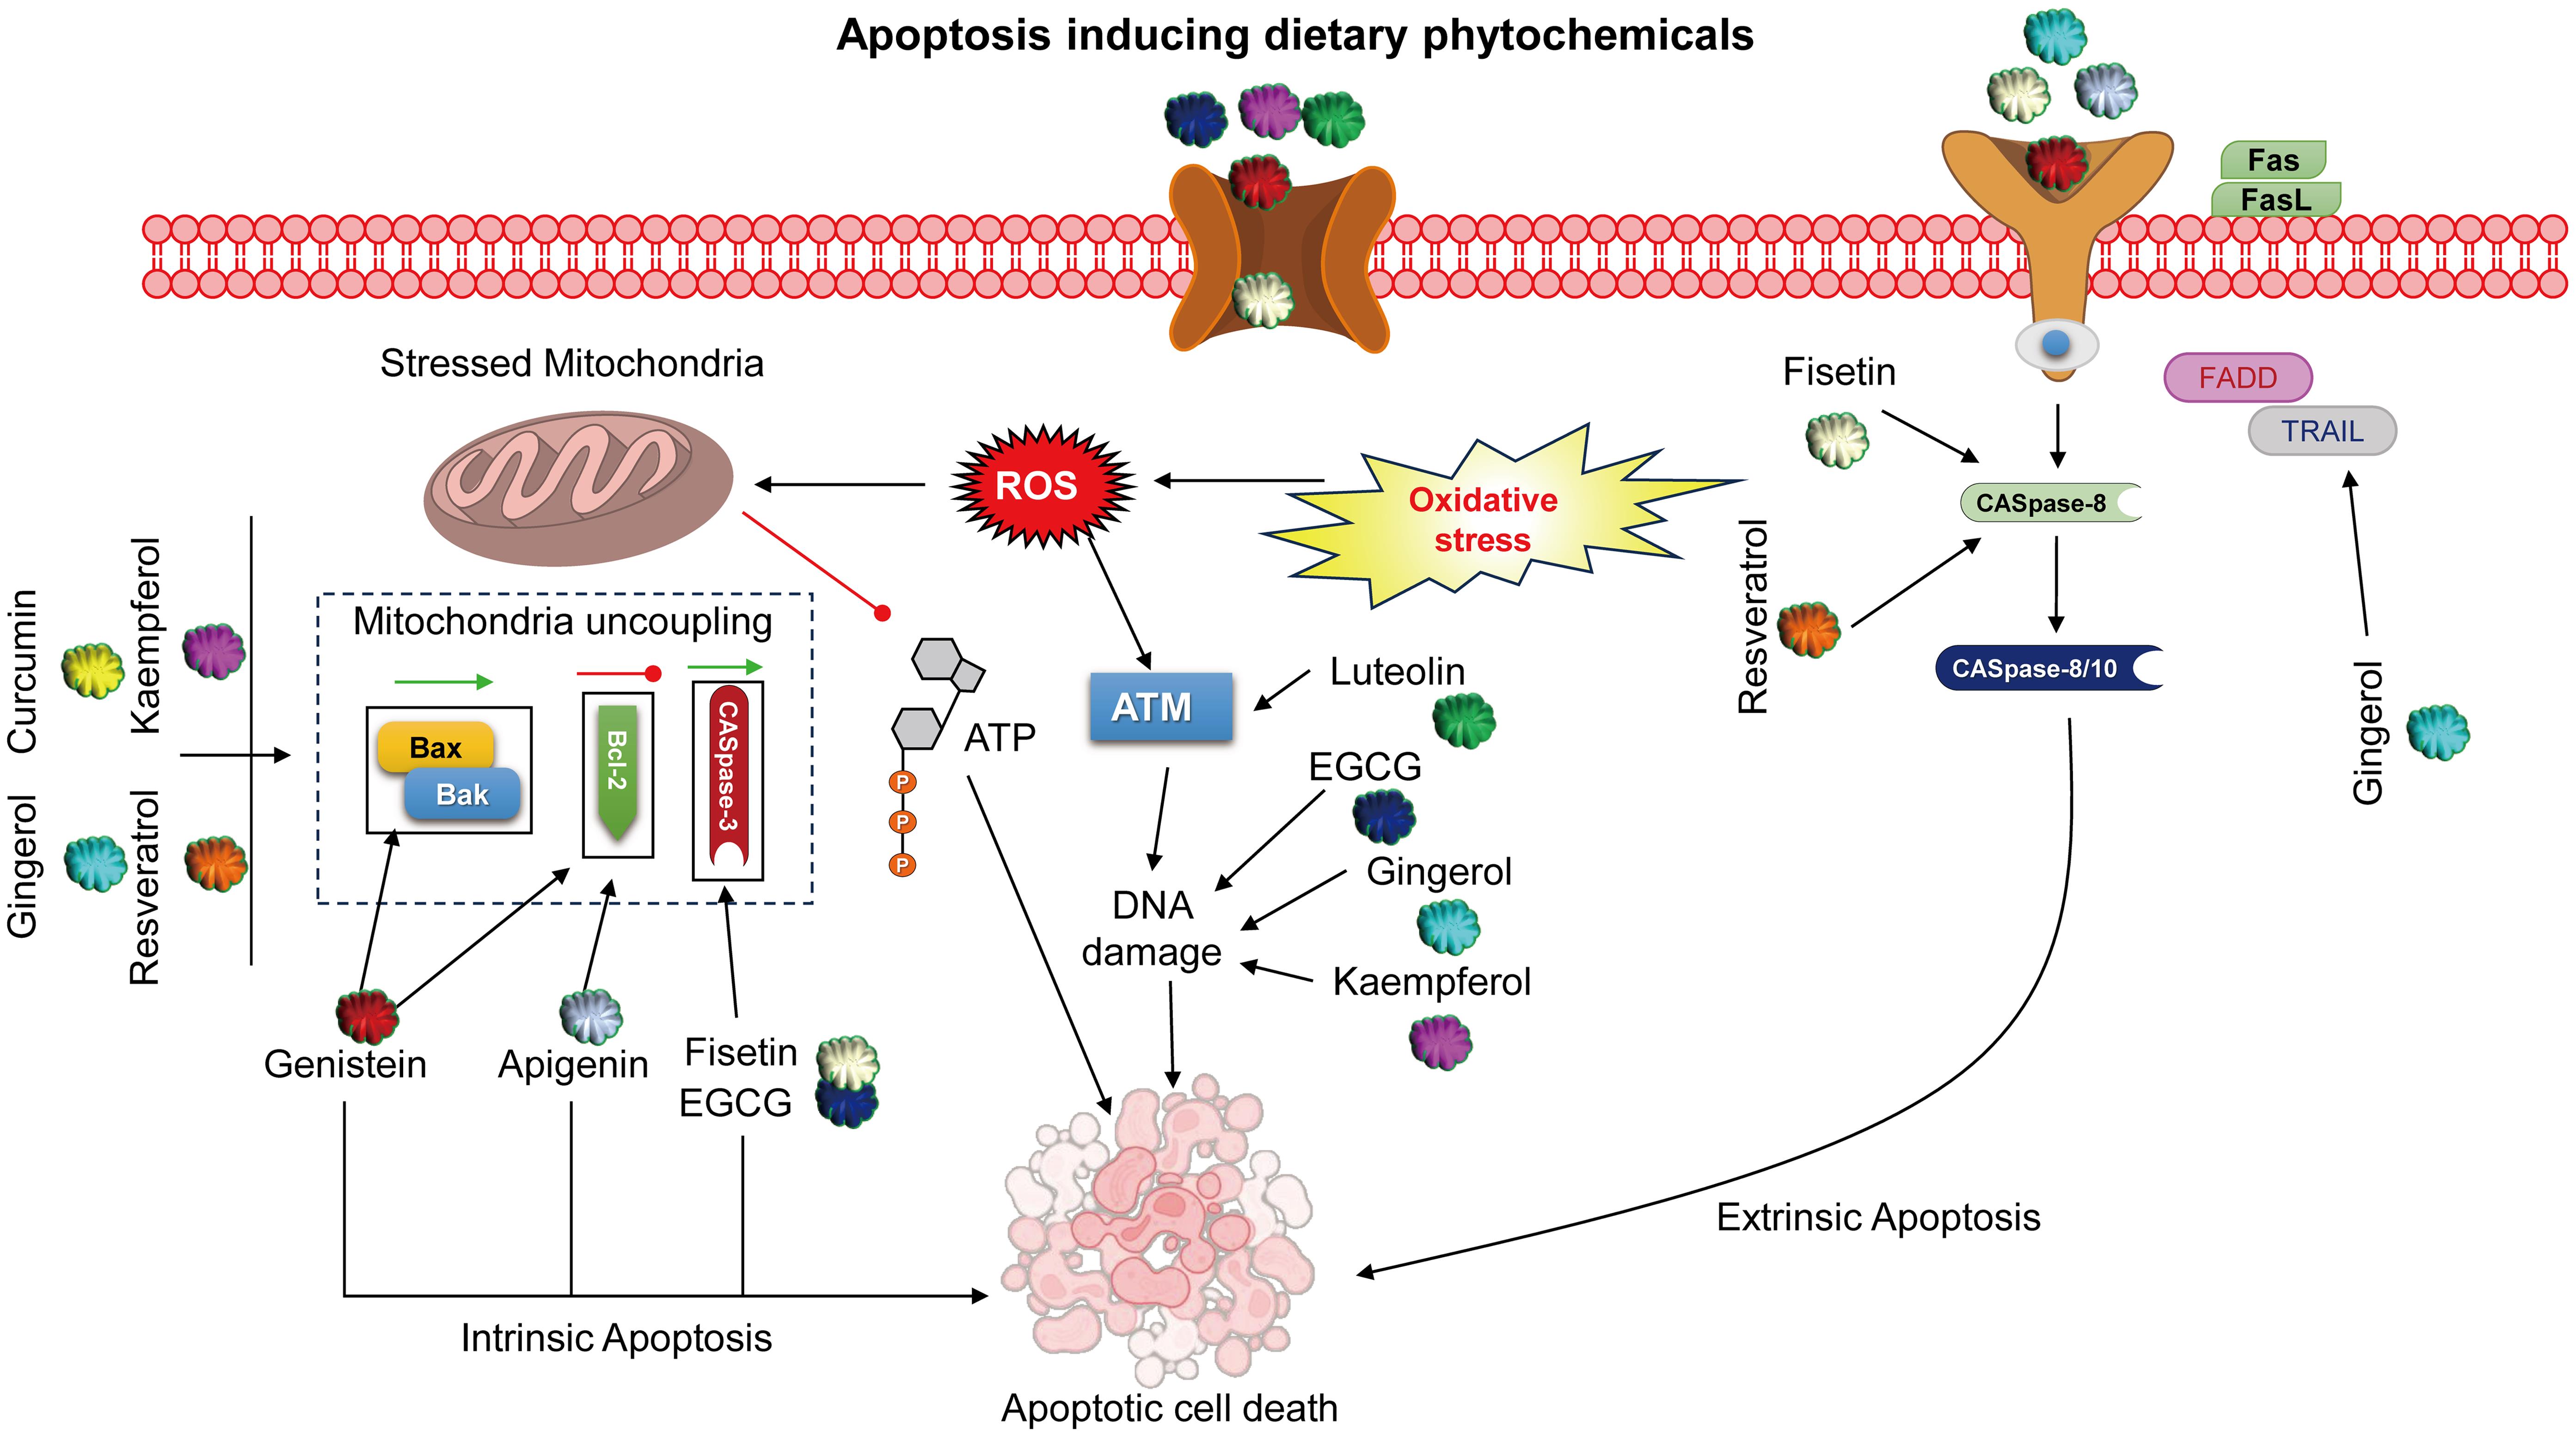 Dietary phytochemicals inducing apoptosis mechanism.